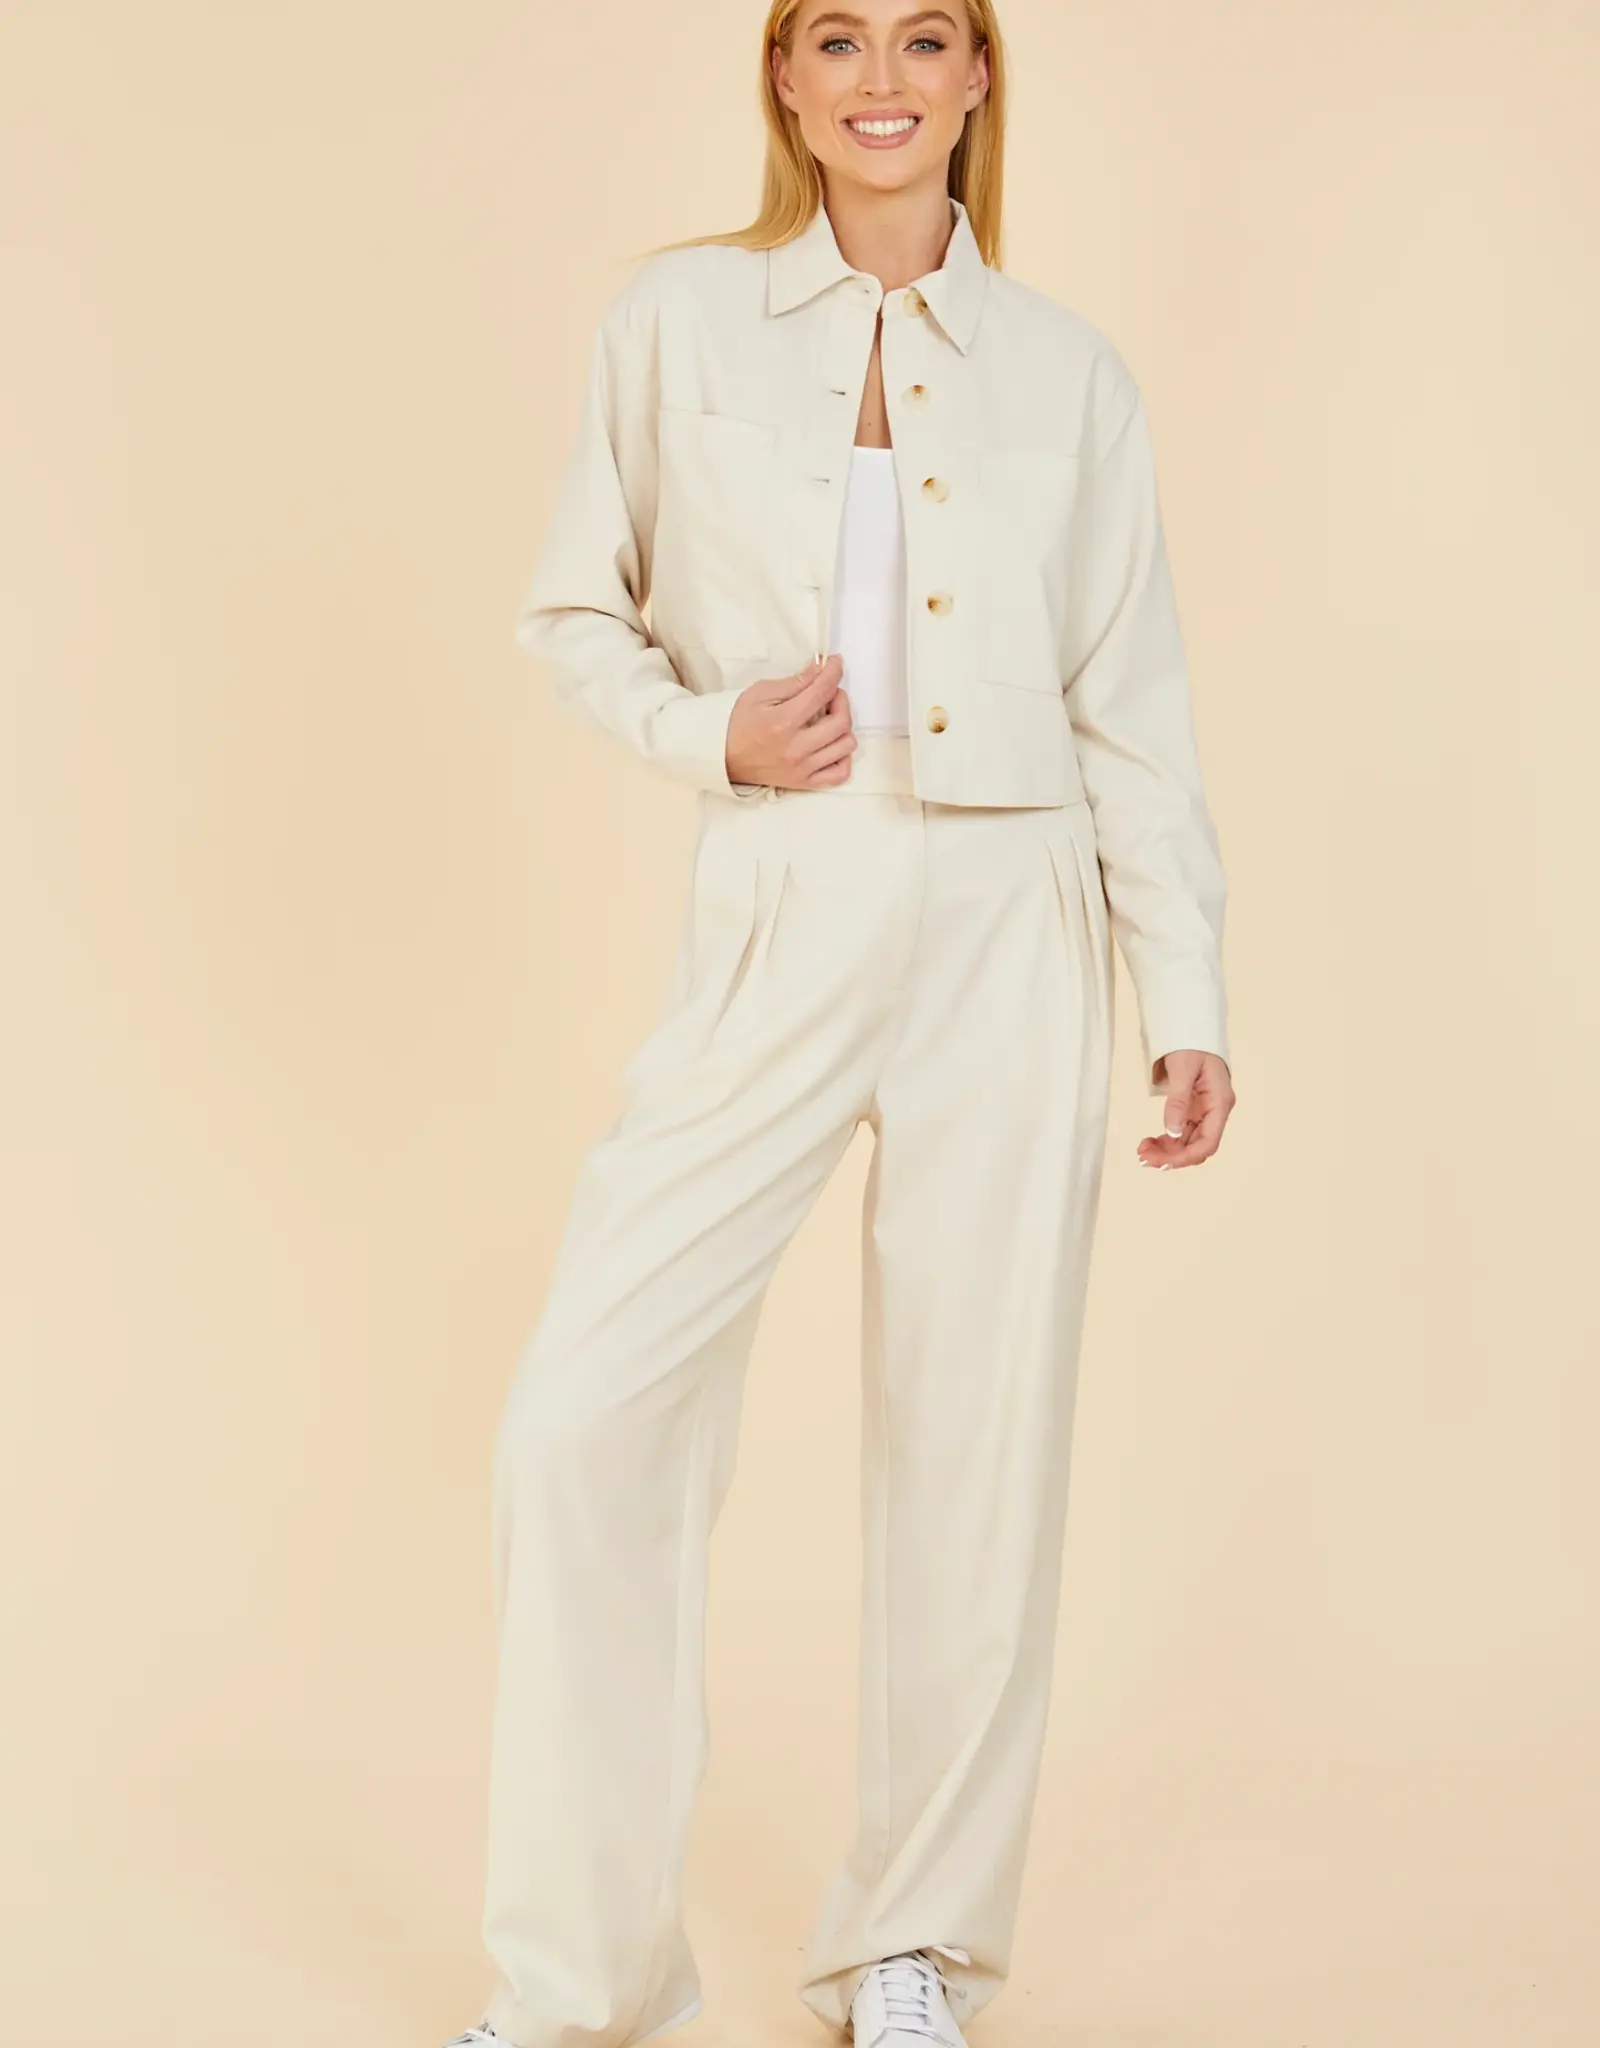 Dolce Cabo Dolce Cabo Full Leg Trouser-Creme